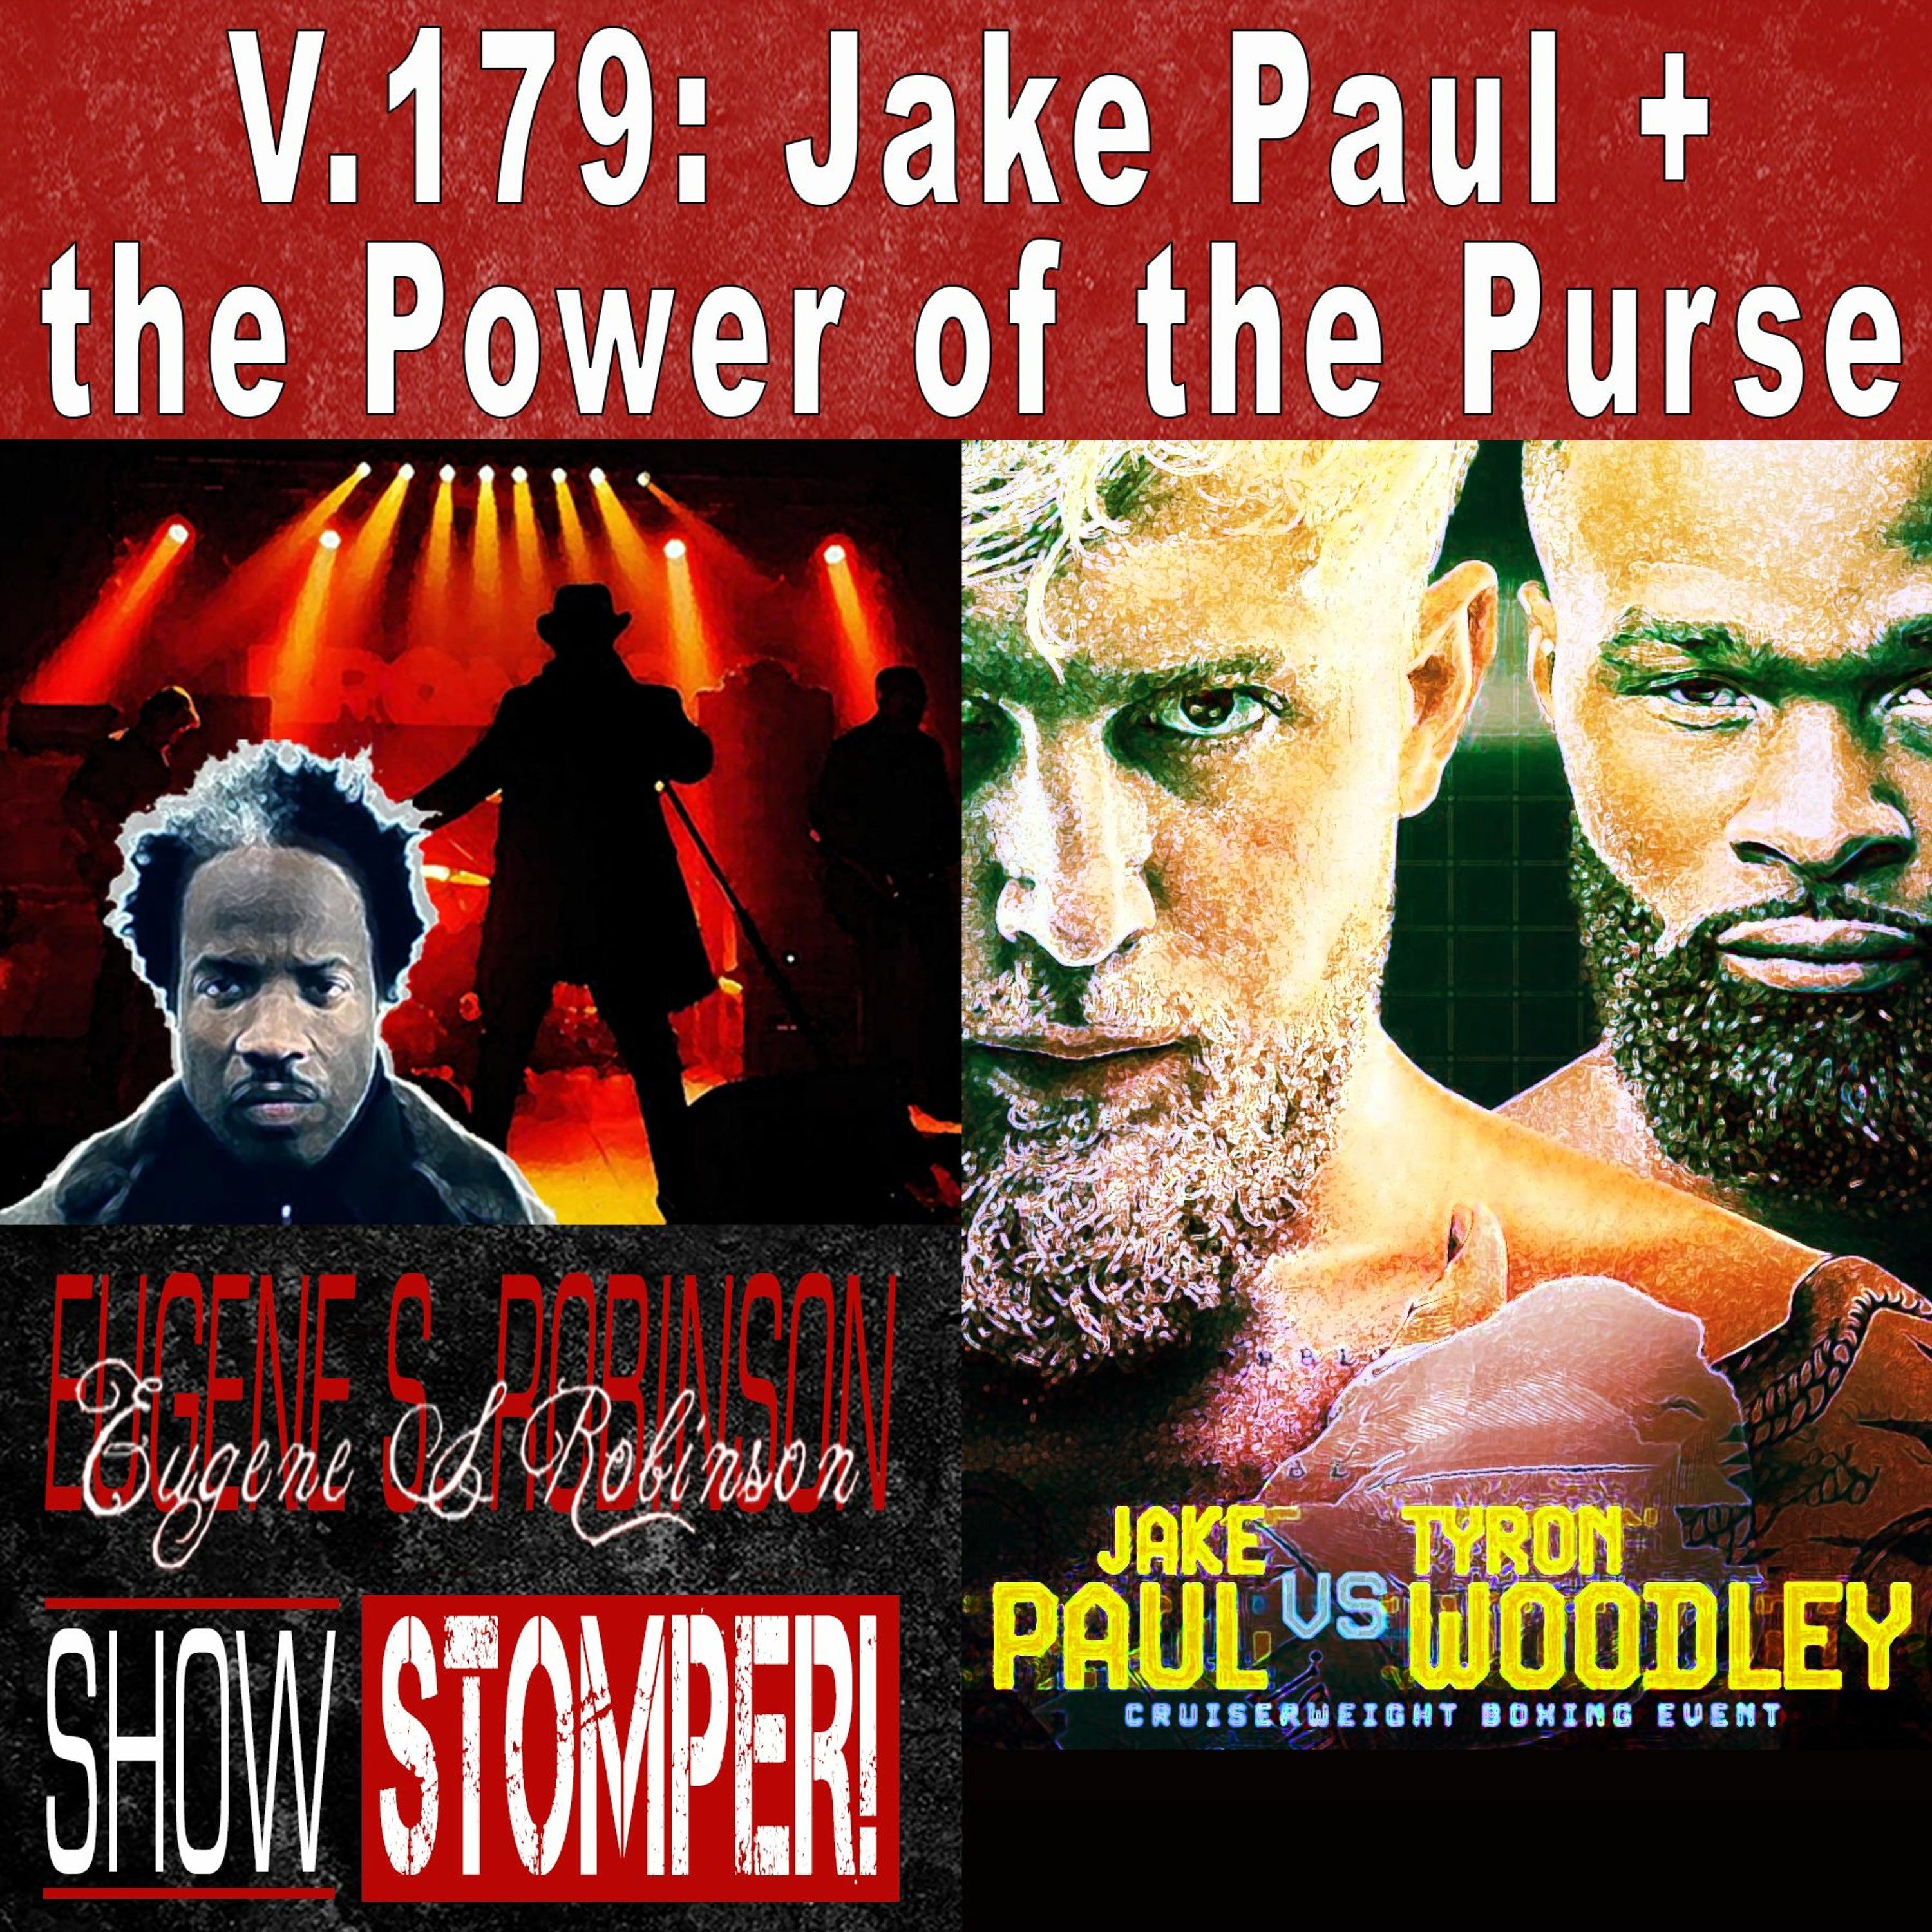 V.179 Jake Paul + The Power Of The Purse On The Eugene S. Robinson Show Stomper!